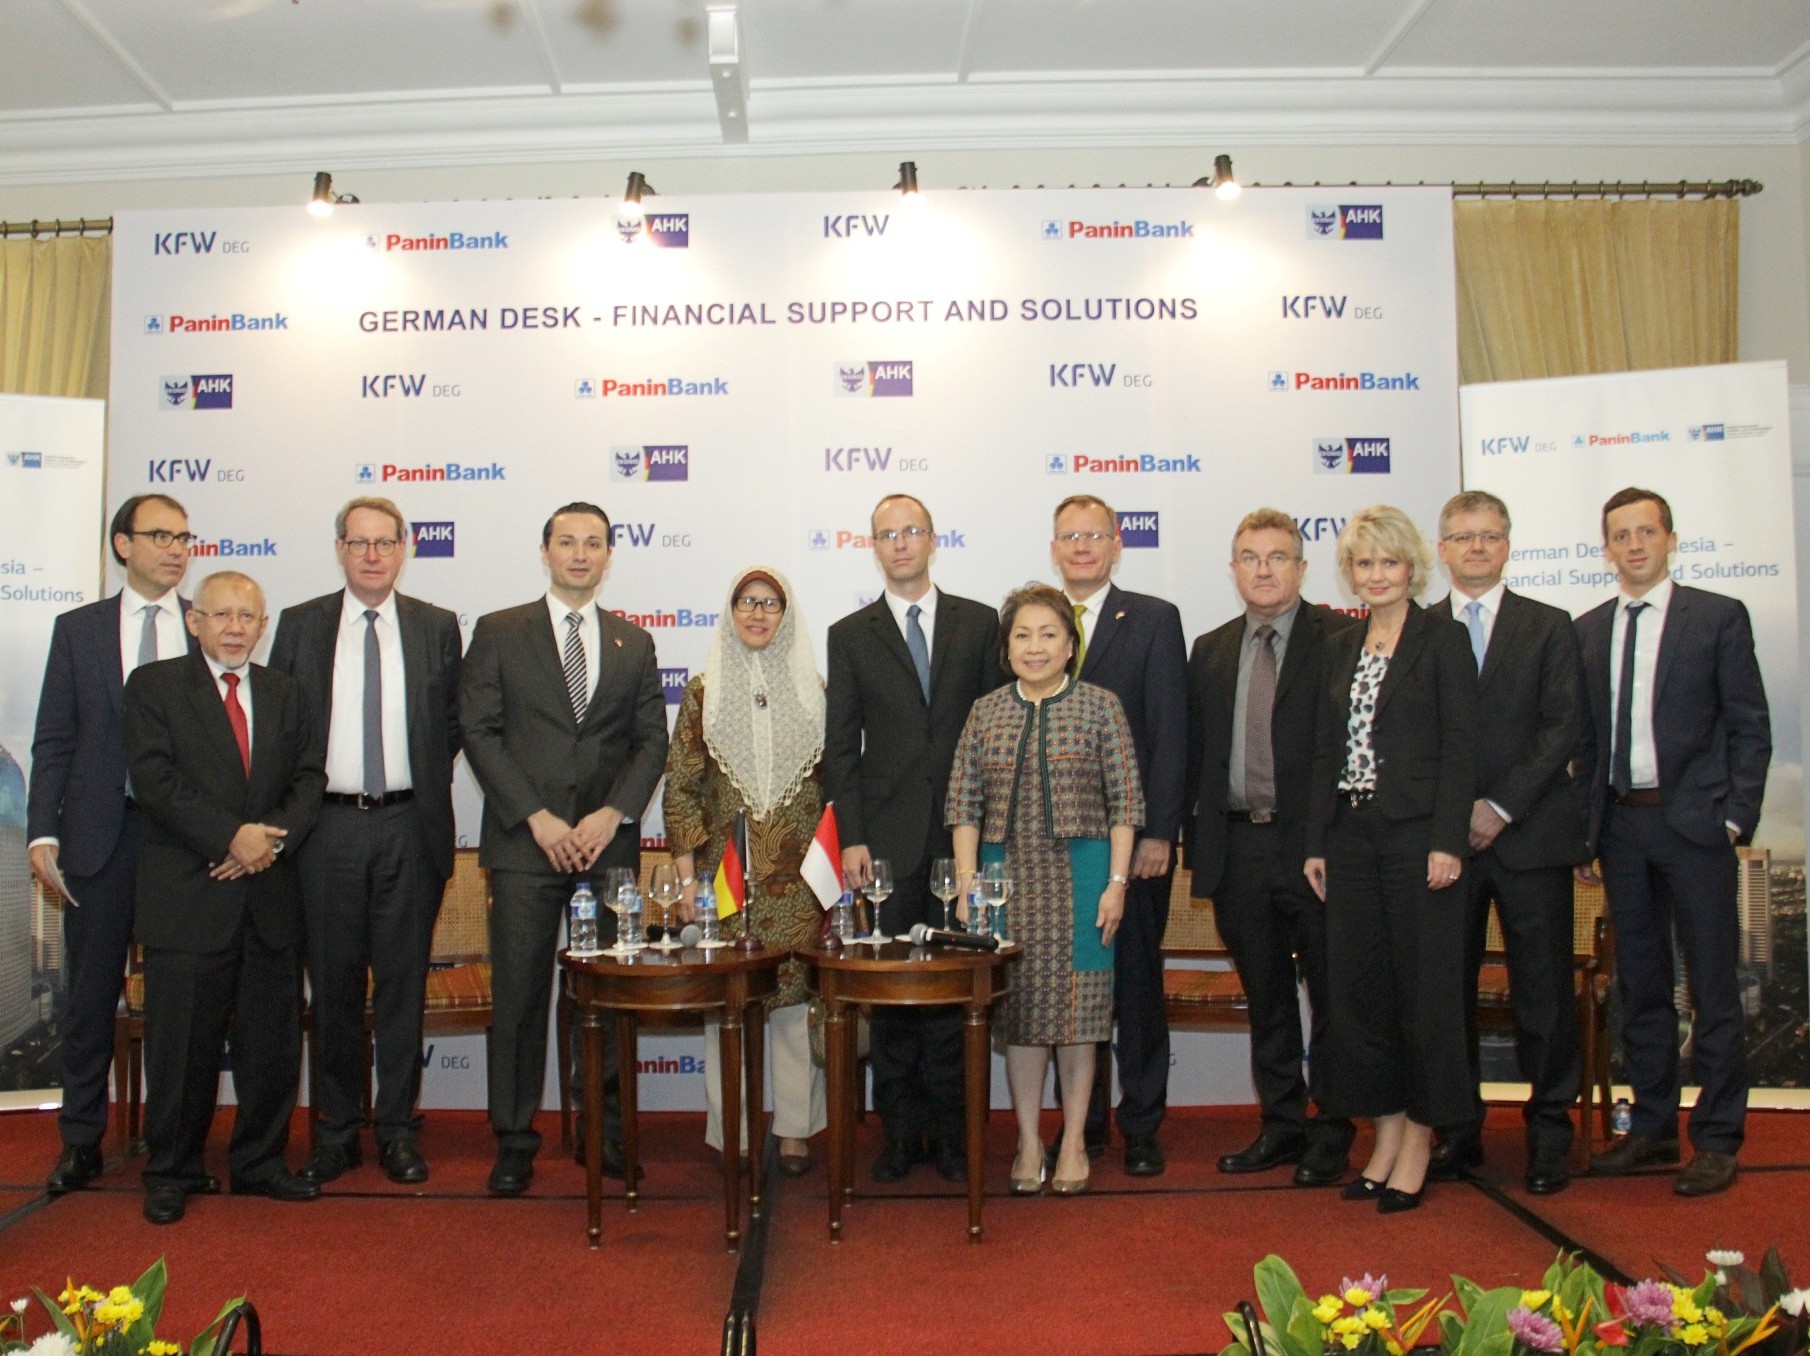 Panin Bank Launches German Desk Financial Support & Solutions in Indonesia